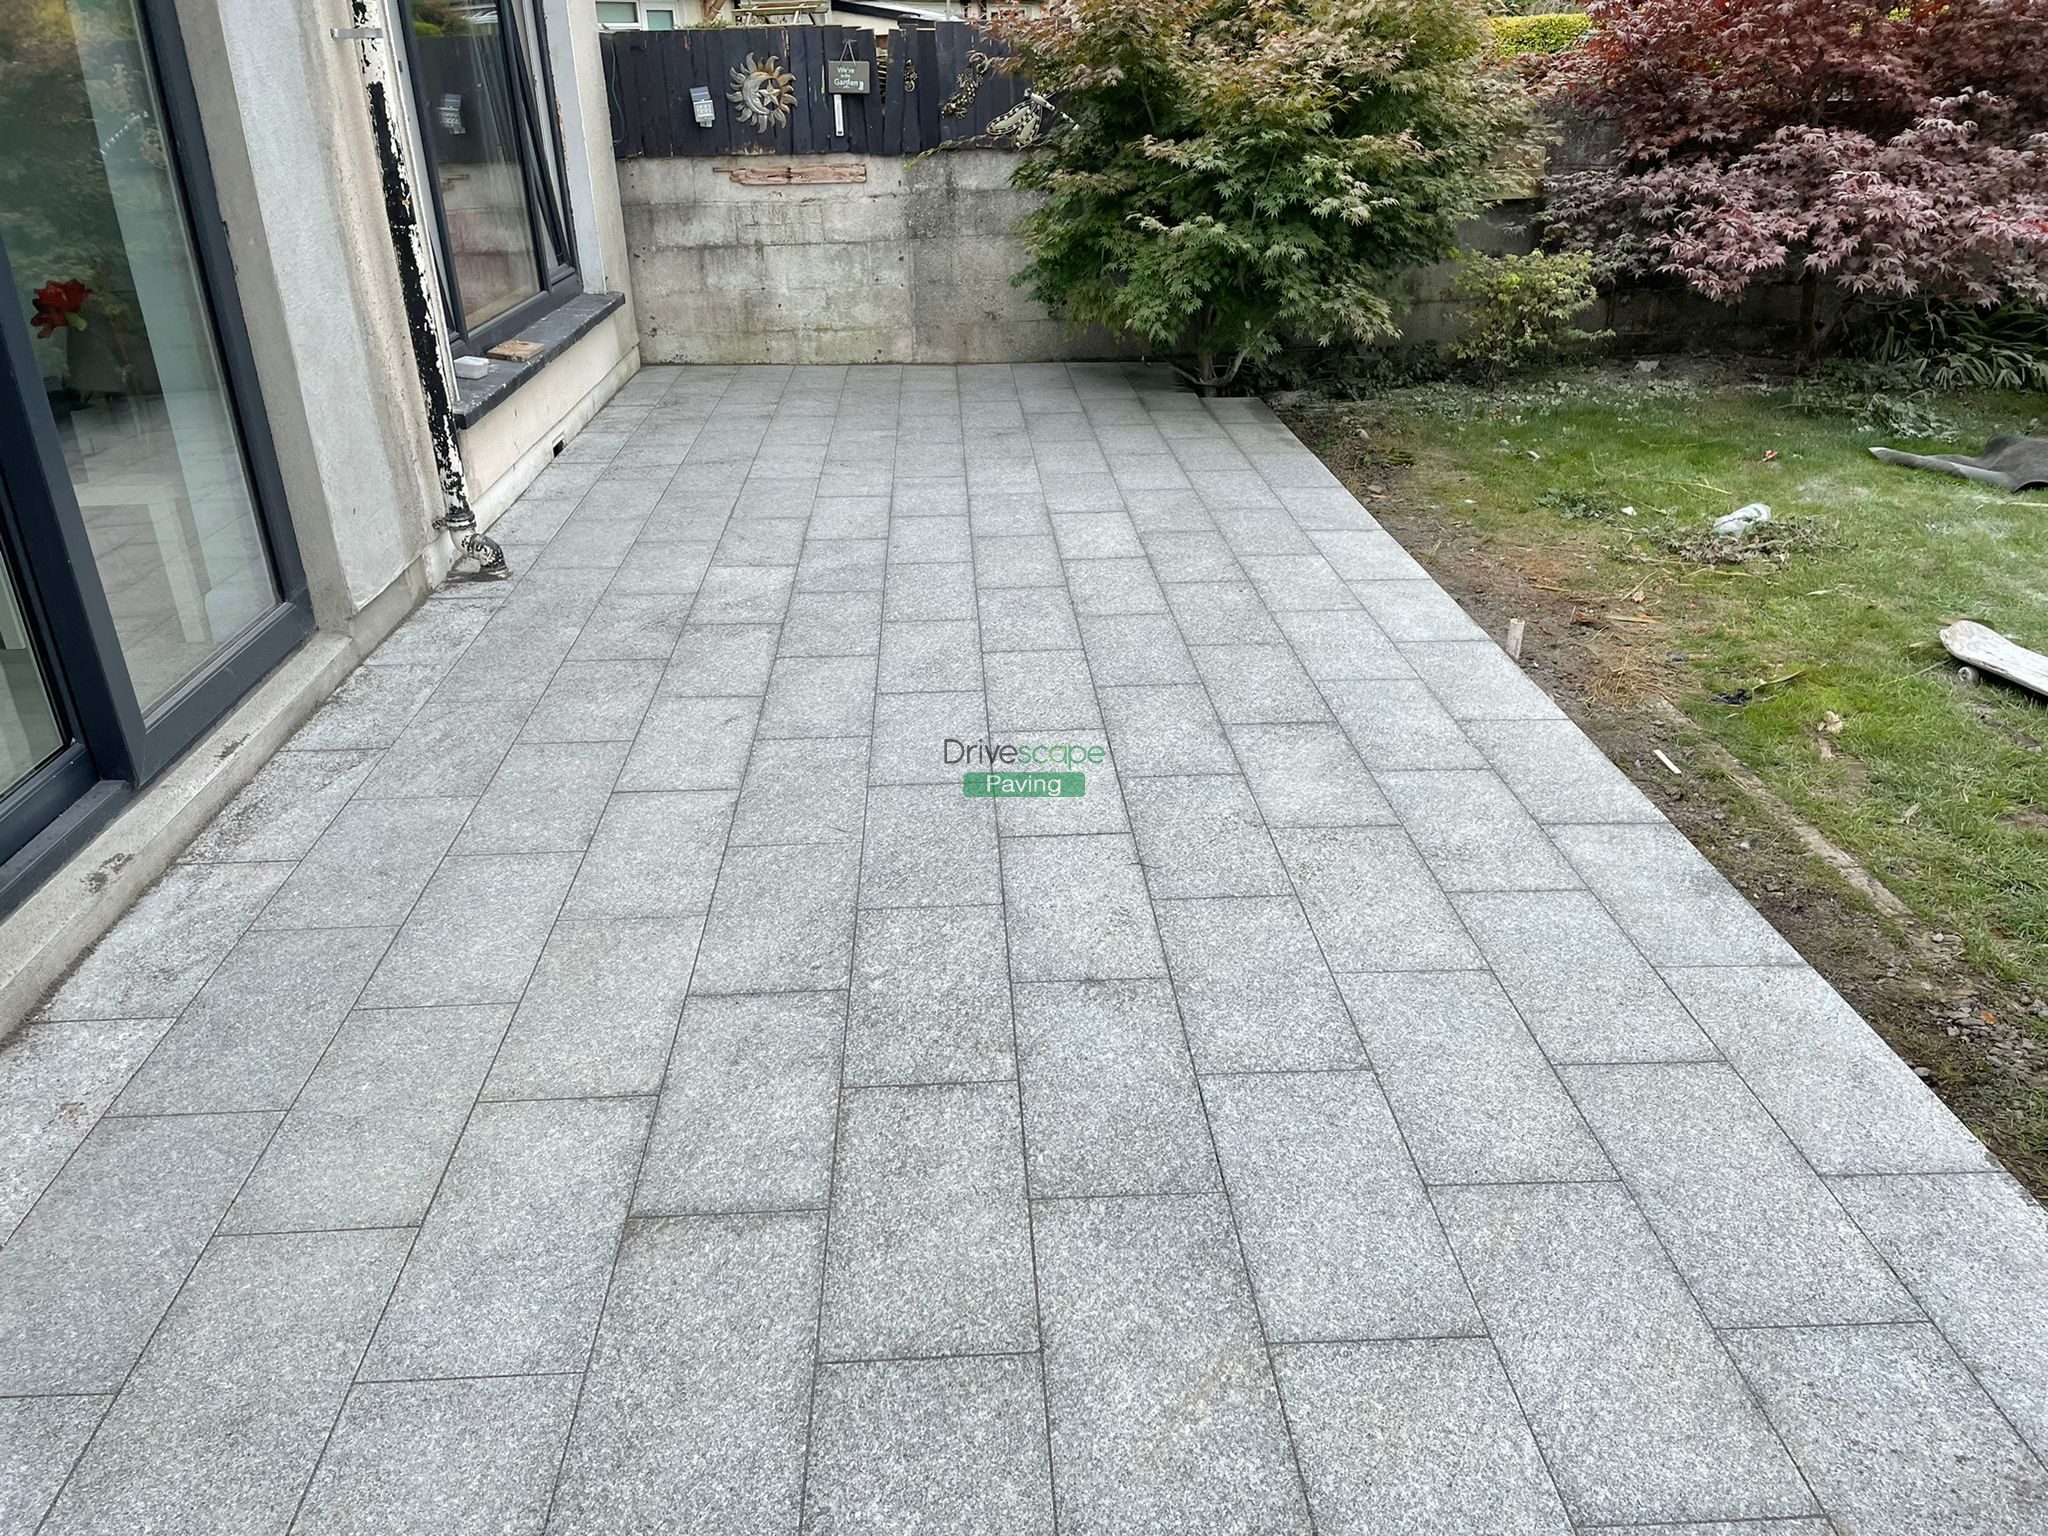 Raised Patio with Granite Slabs in Templeogue, Dublin